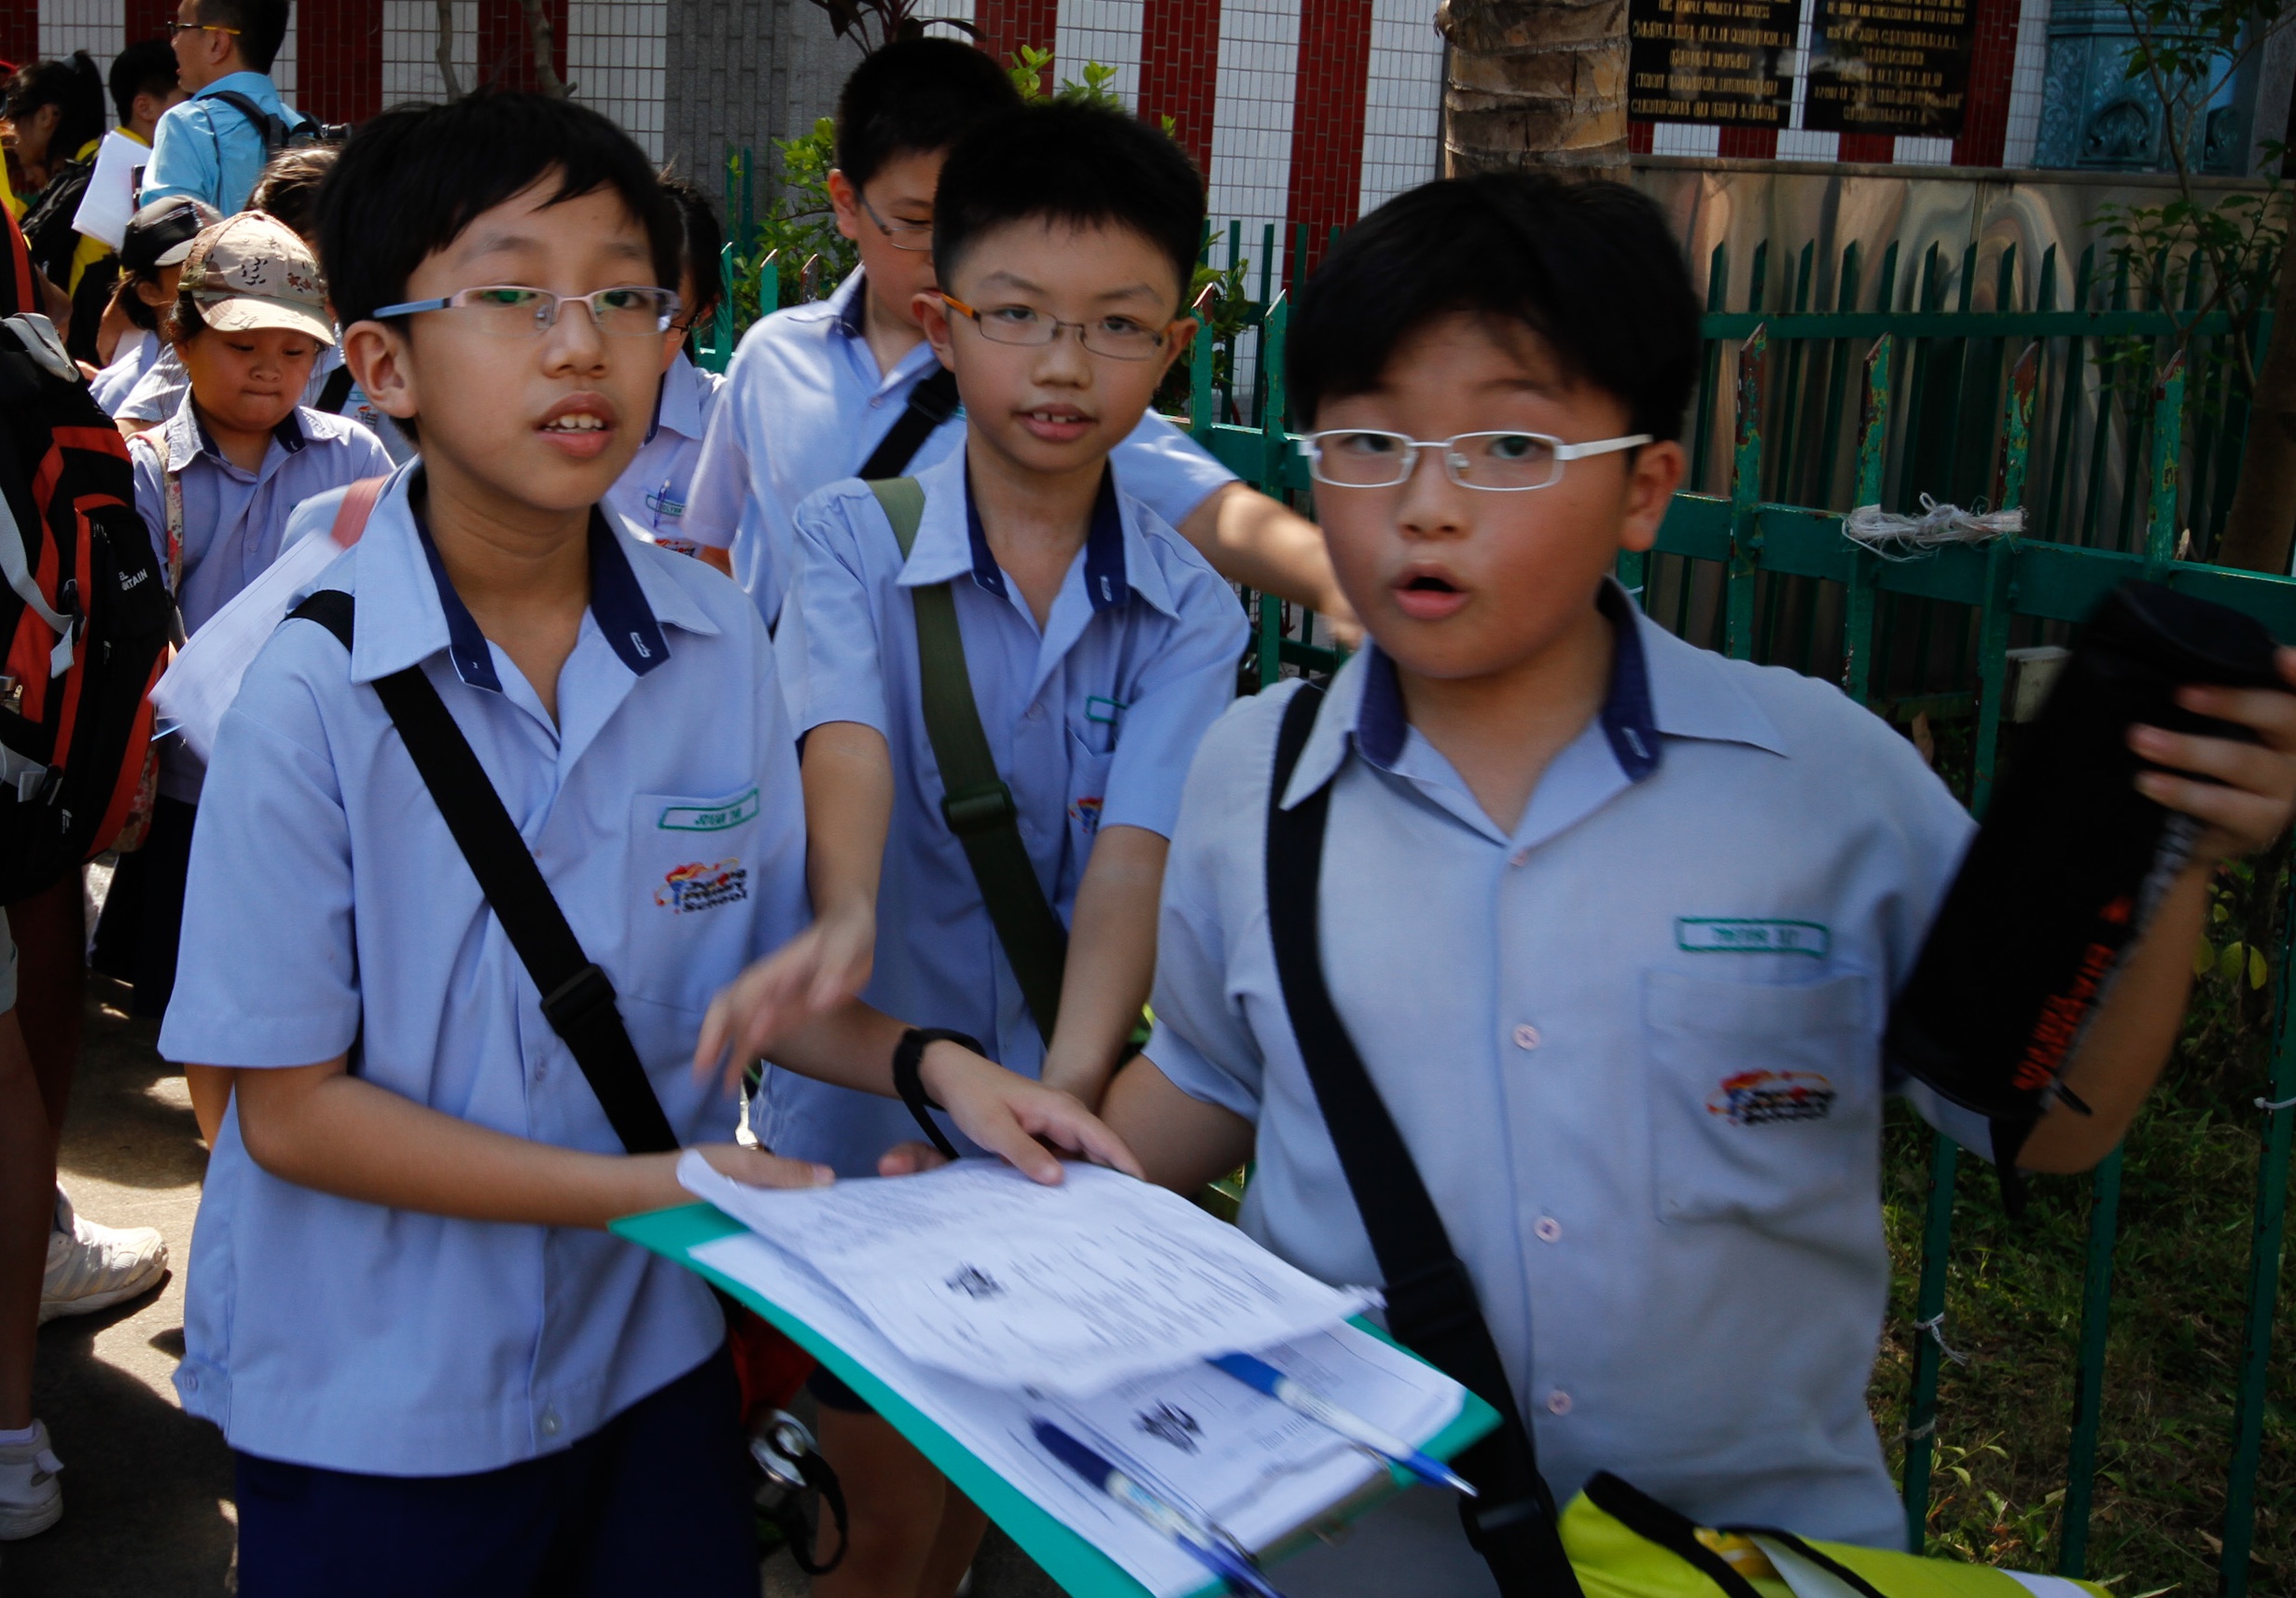  Developed East Asia soars in math and science test results